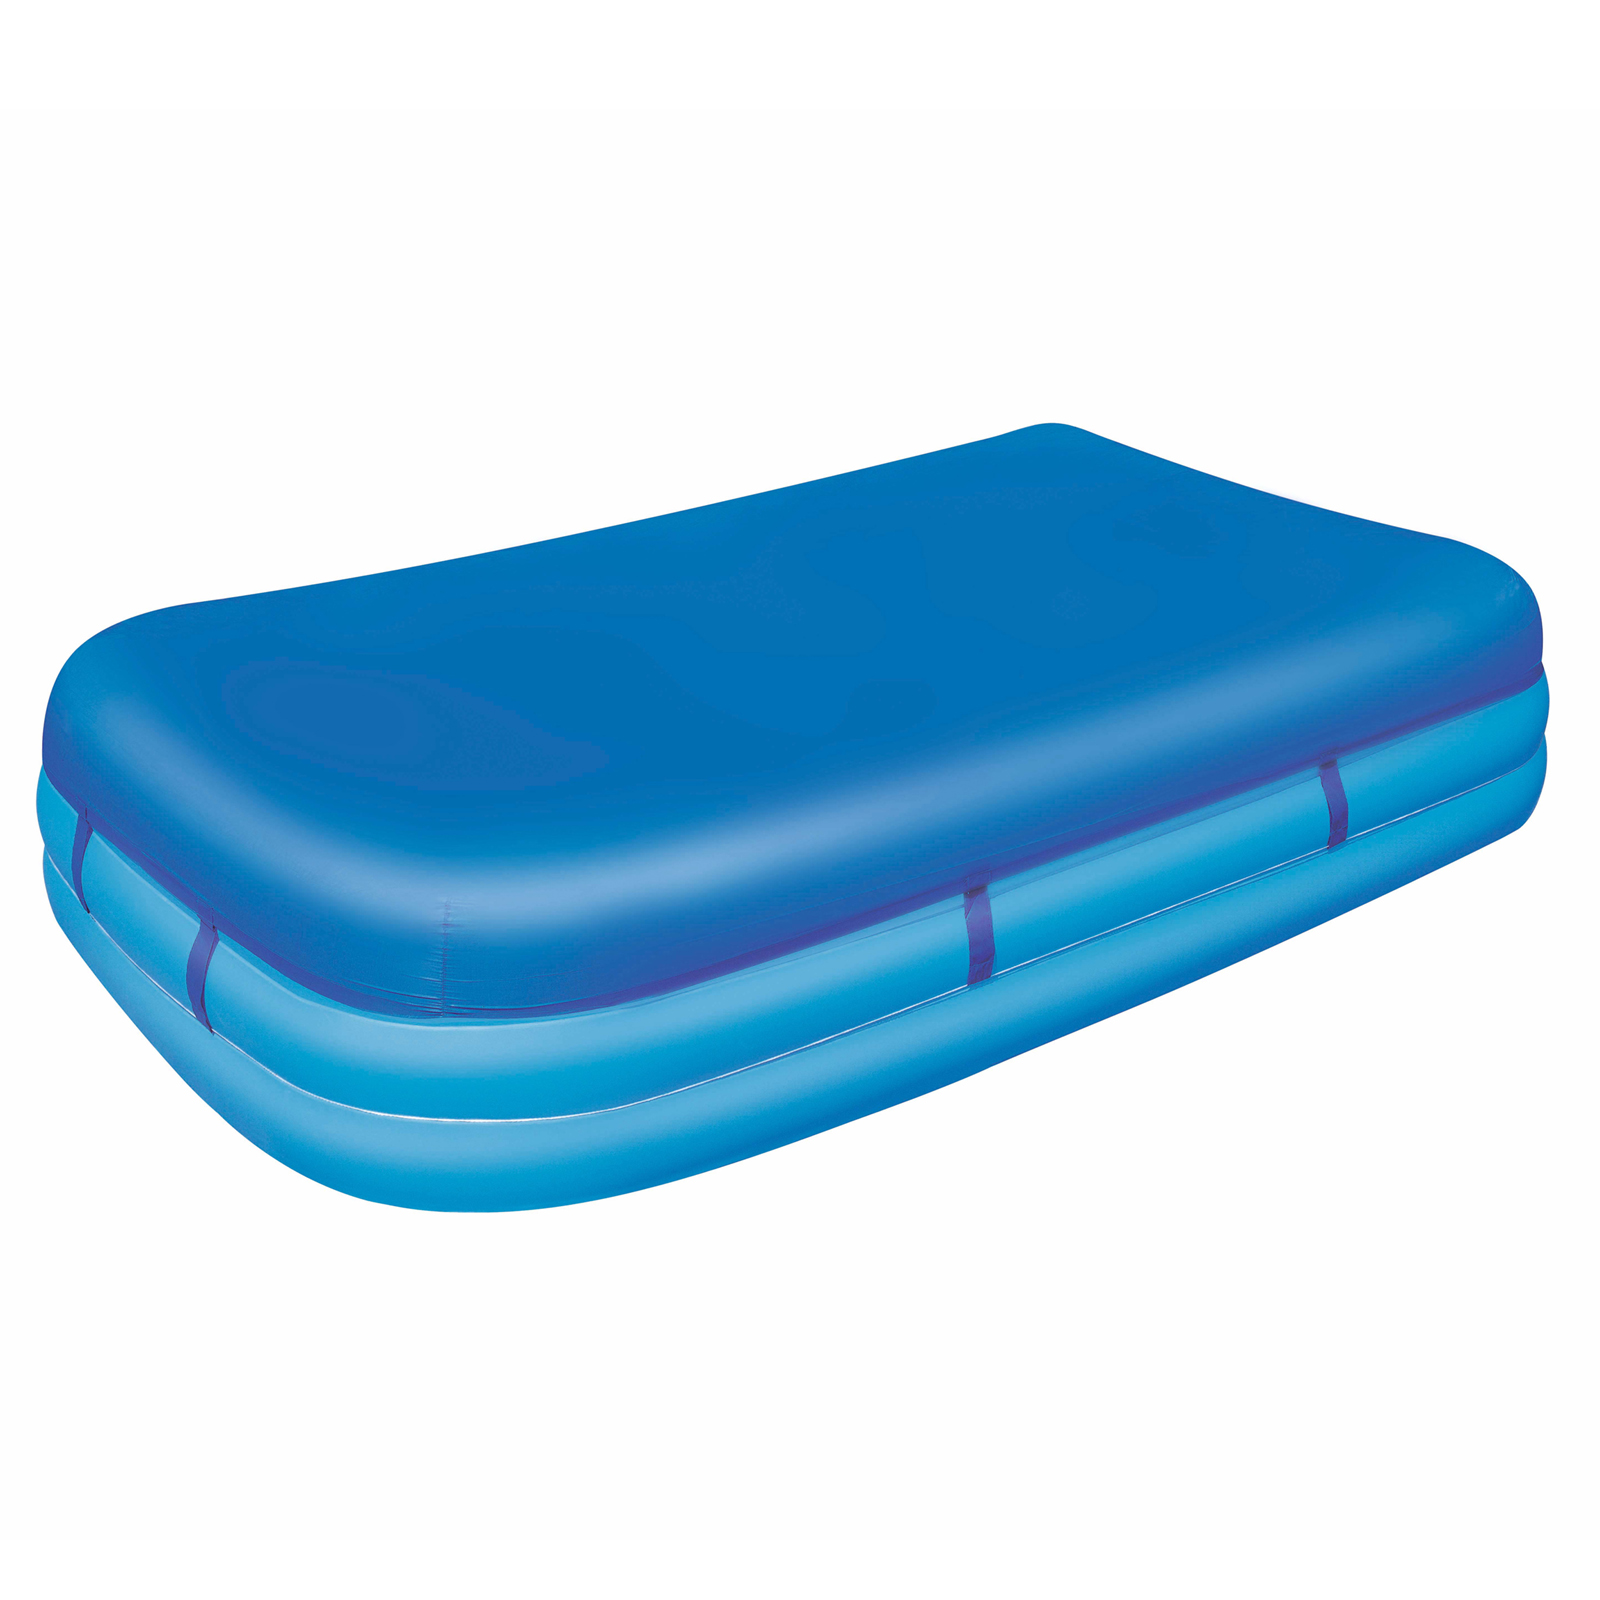 UPC 821808581085 product image for Bestway Rectangular Family 10-foot Pool Cover | upcitemdb.com